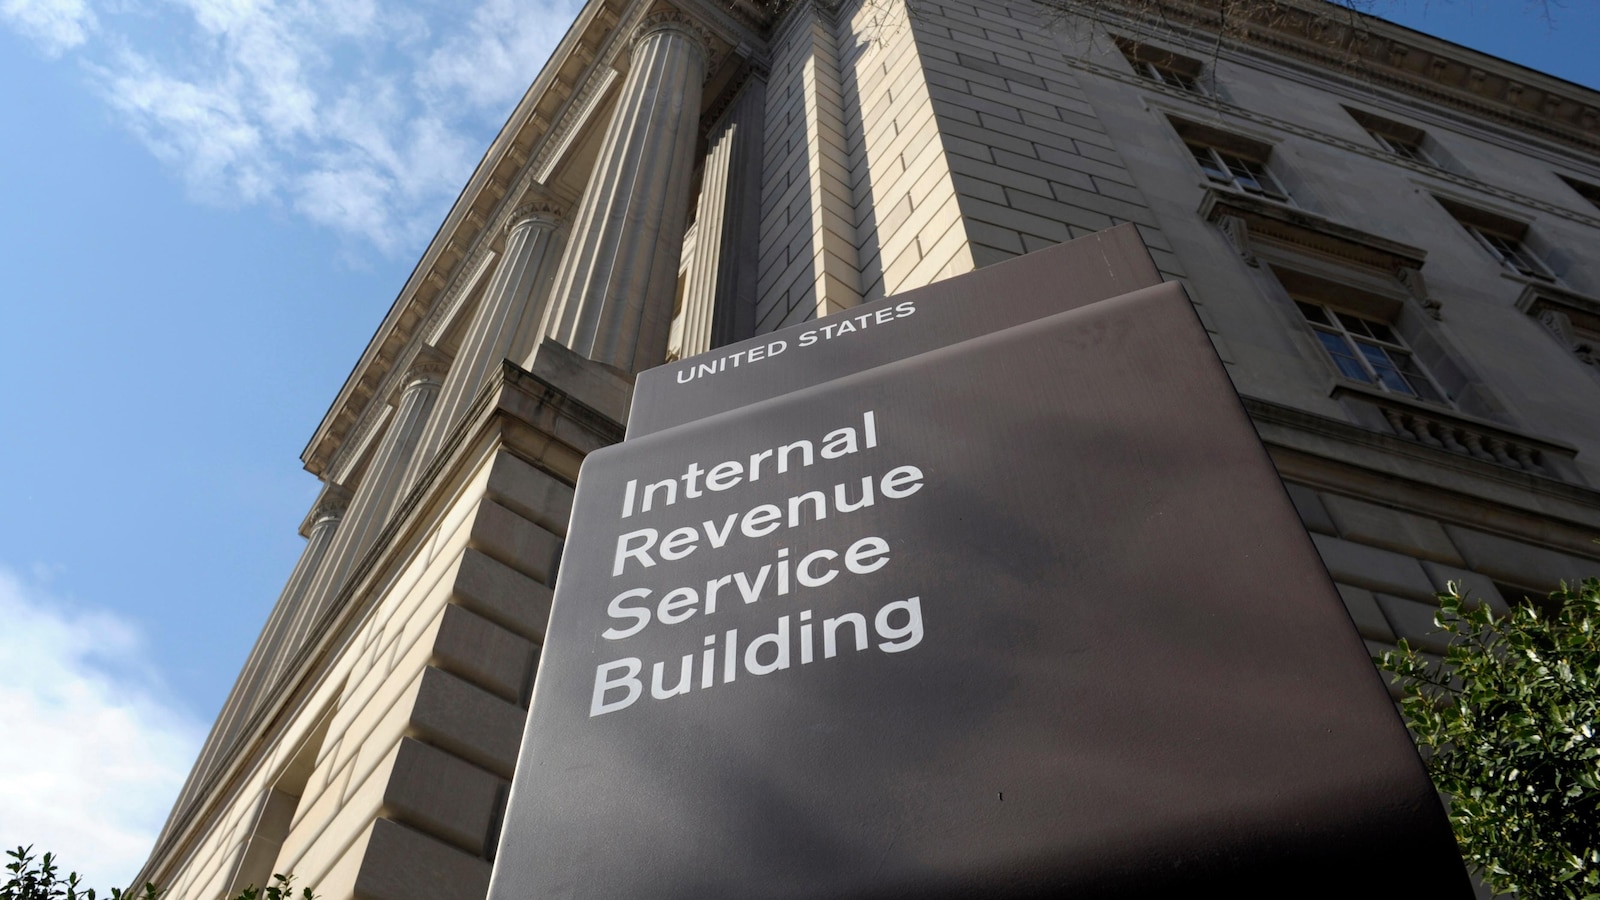 IRS Increases Collection from Wealthy Tax Evaders by $360M Amidst Looming Funding Challenges